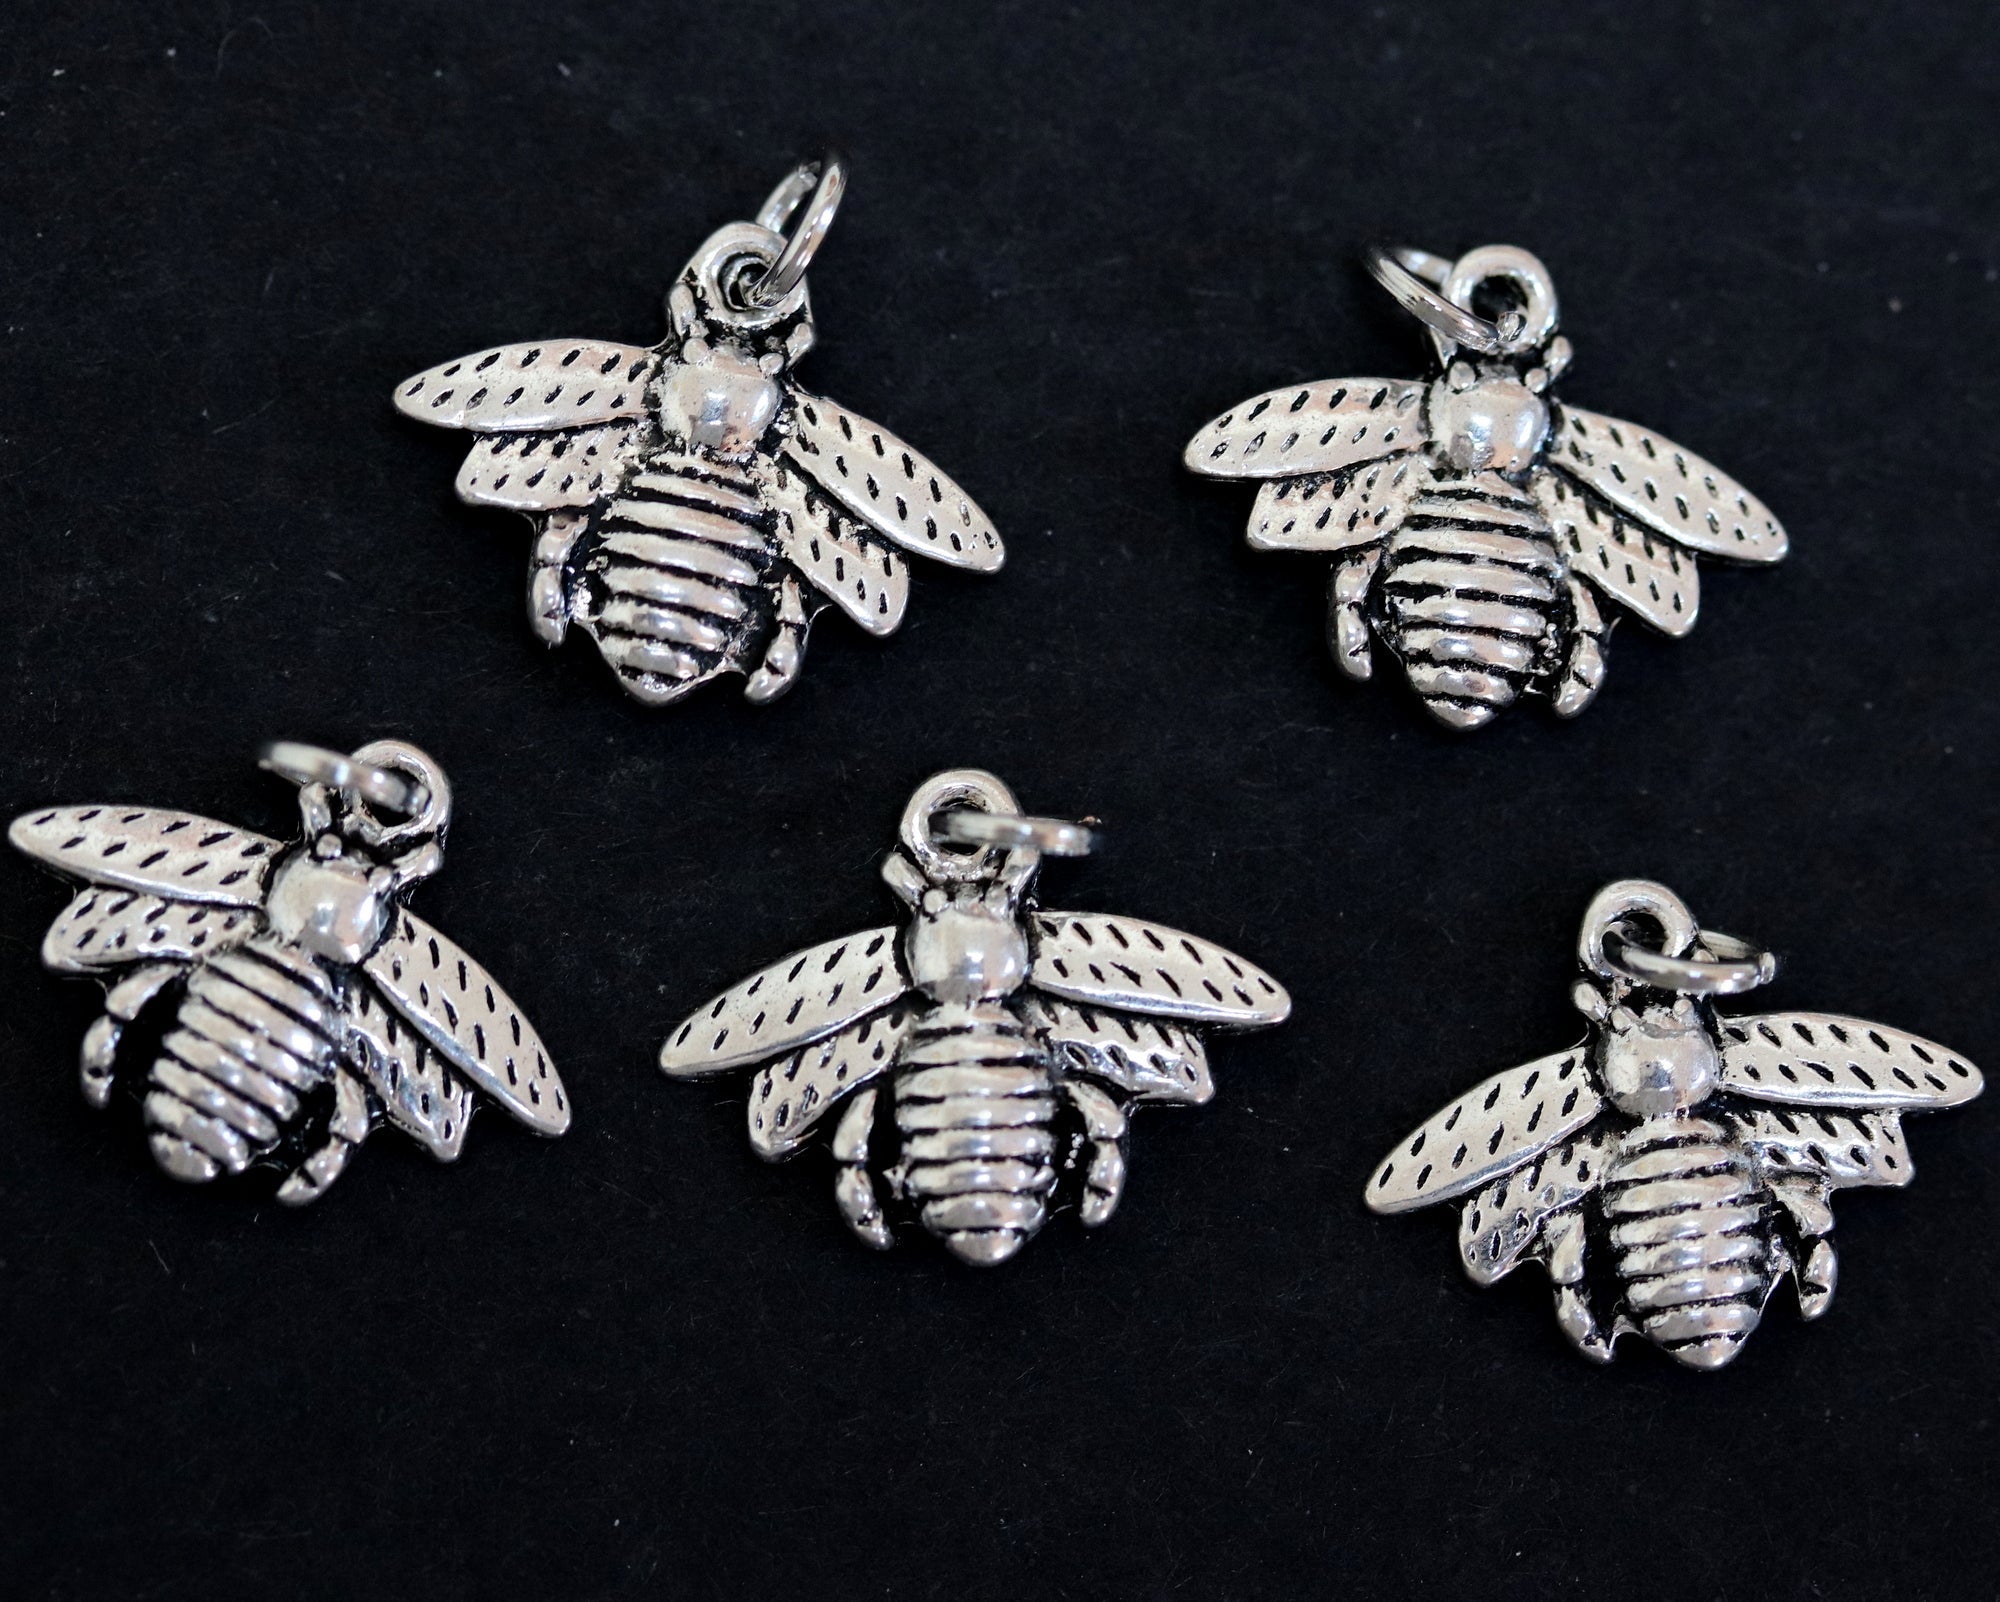 Bee charm 14x17mm antique silver plated metal alloy pendant